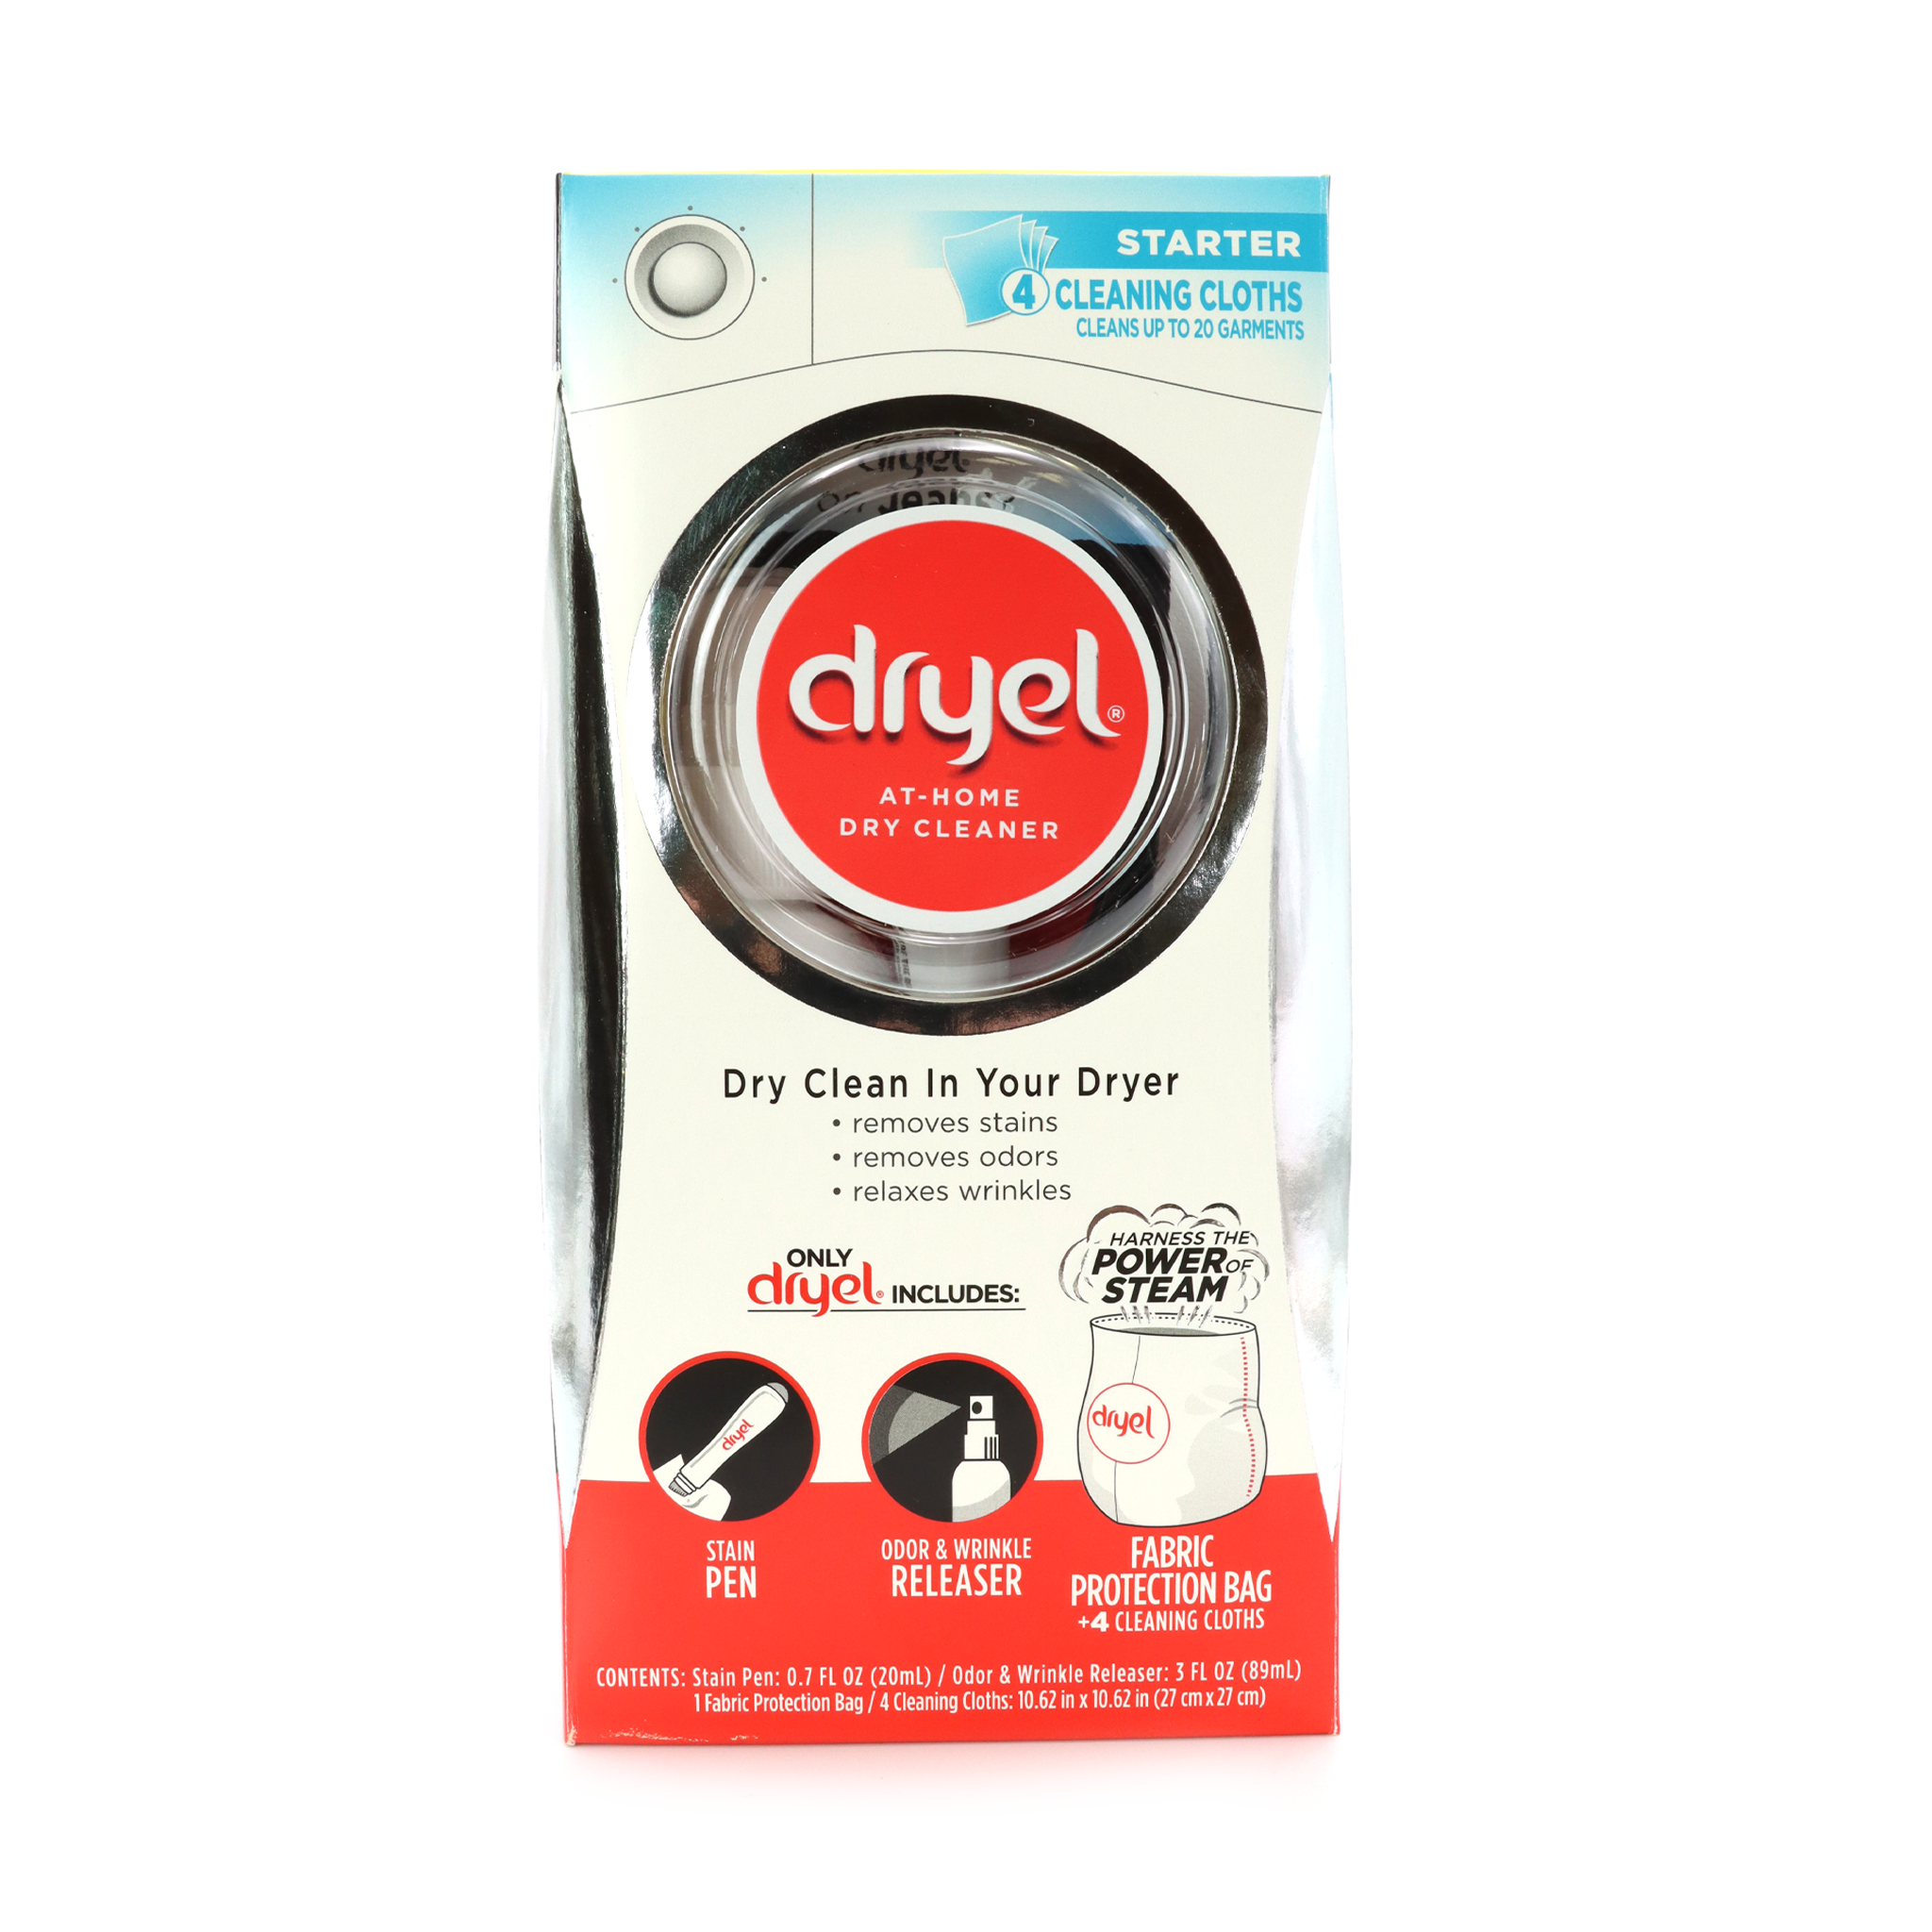 Dryel at-Home Dry Cleaning Starter Kit with Stain Pen & Wrinkle Spray